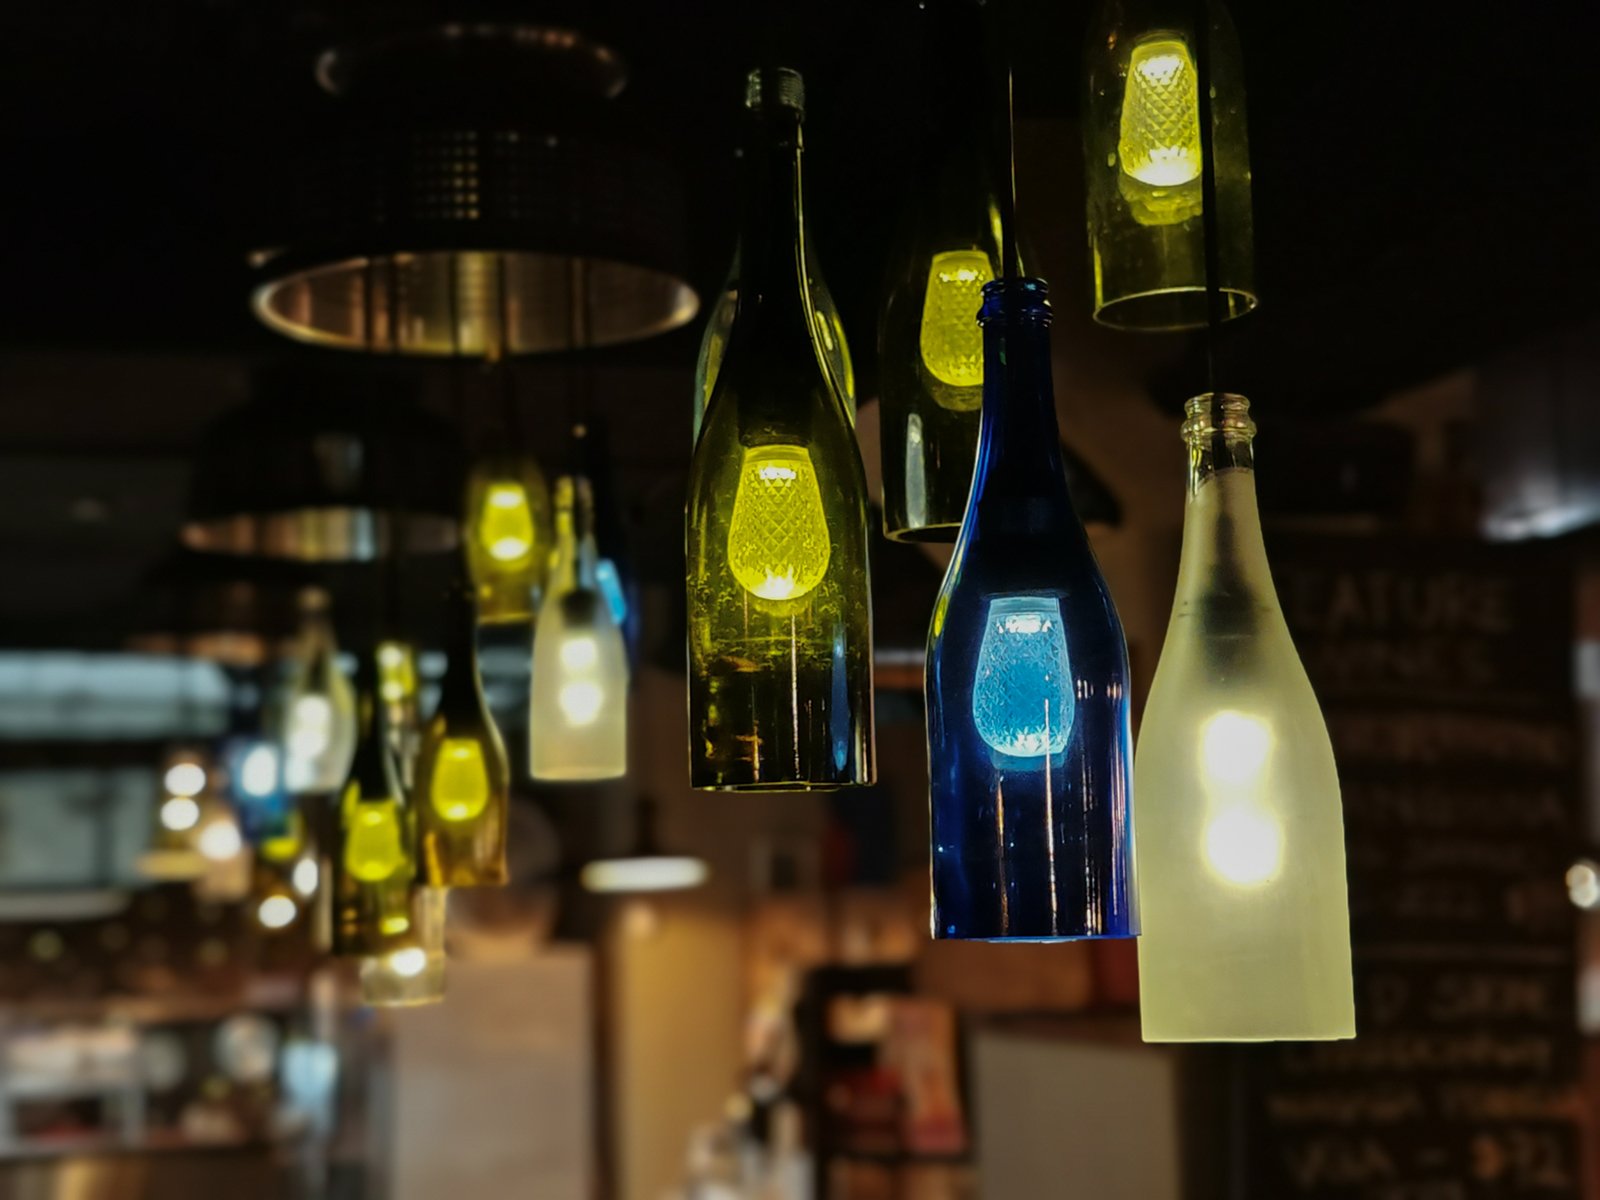 Decorative light fixtures made from recycled glass bottles in various colors, hanging in a dimly lit bar ambiance. the bottles emit a soft, warm glow, enhancing the cozy atmosphere.